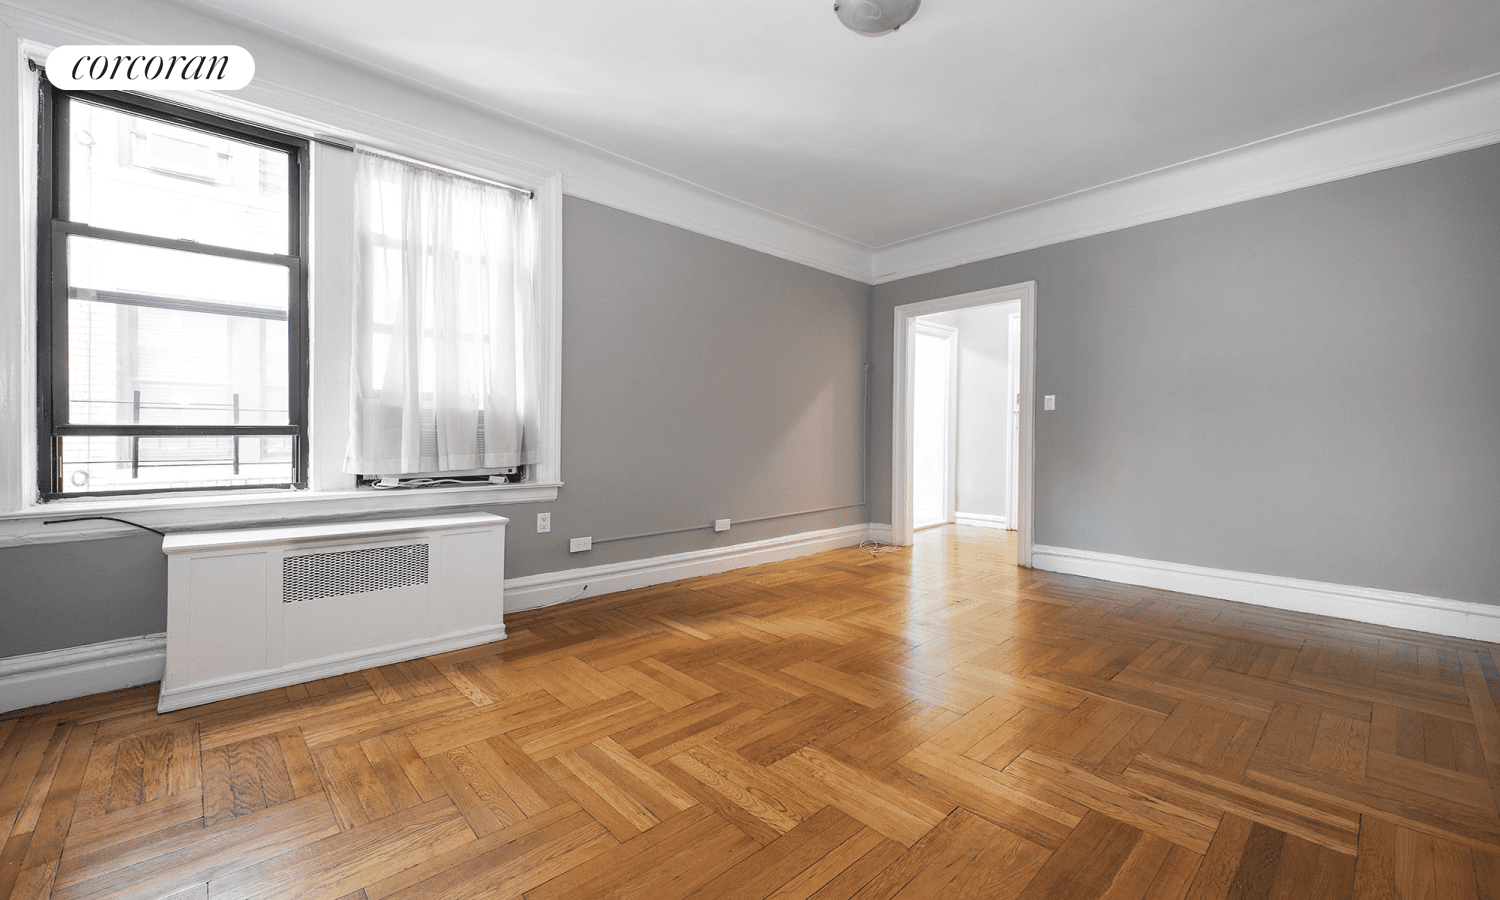 This sun drenched spacious one bedroom located in an elegant six story pre war elevator building boasts high ceilings, original prewar details and beautiful restored solid hardwood floors.